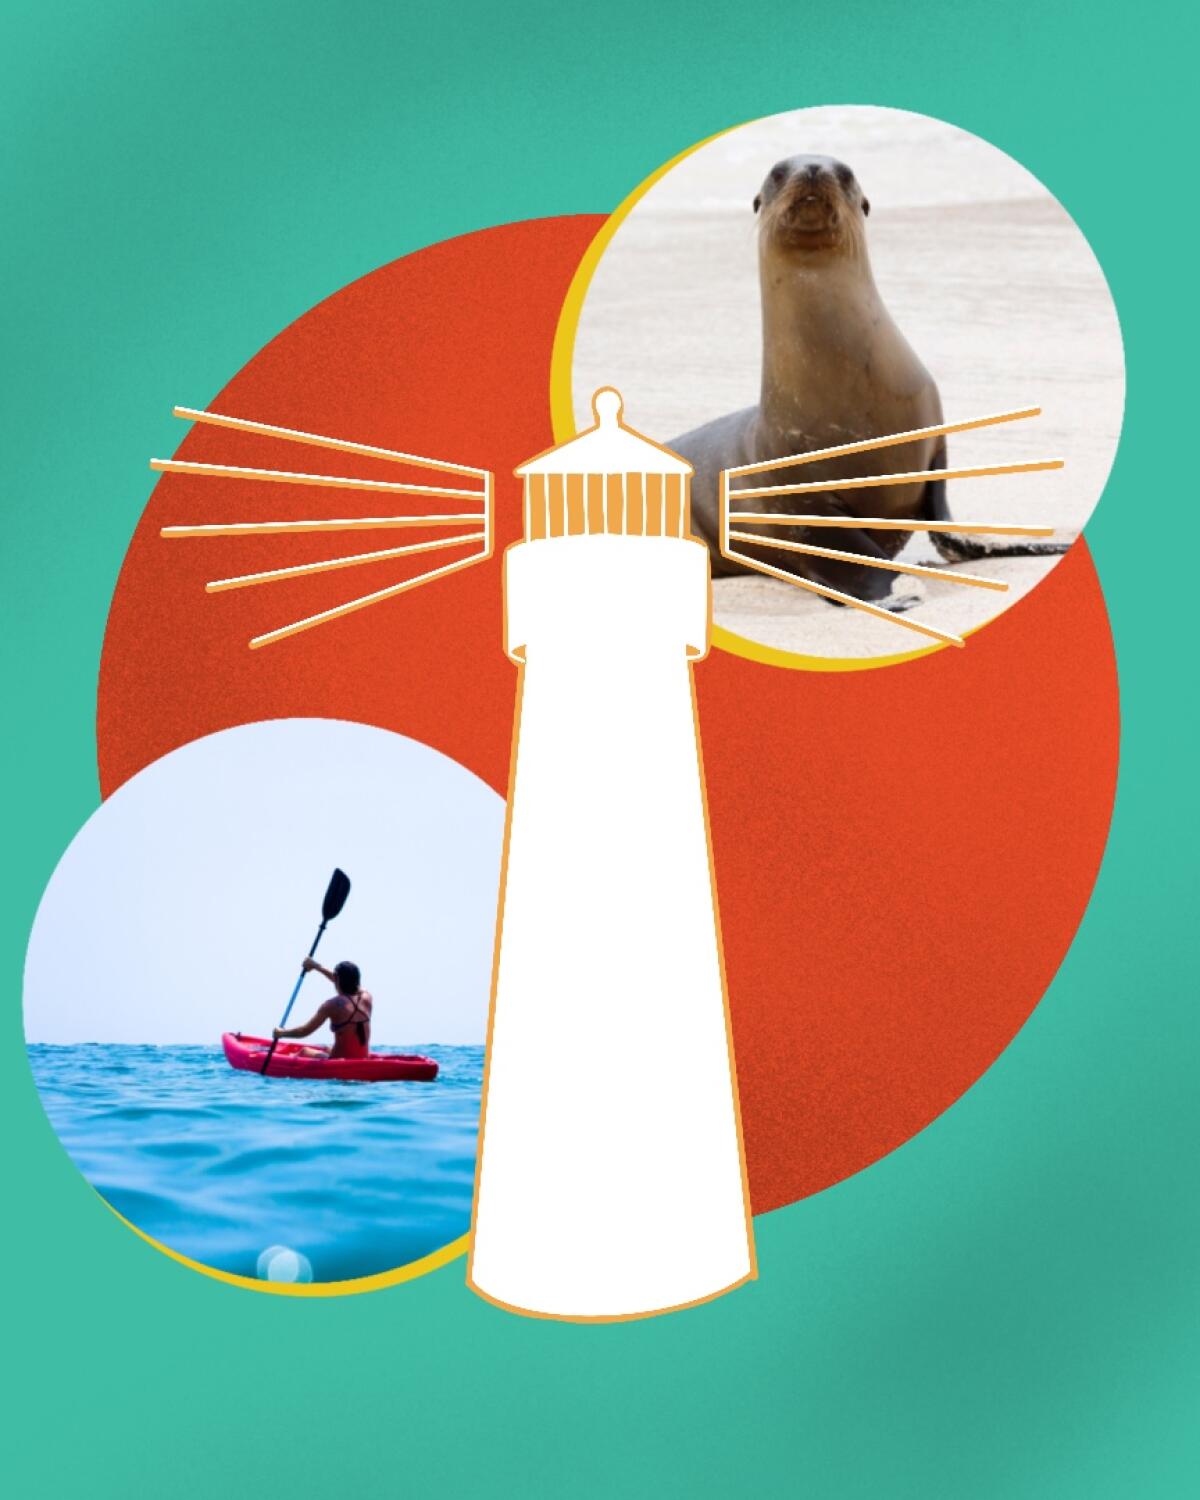 Photo illustration of lighthouse with photos of a seal and a kayaker.